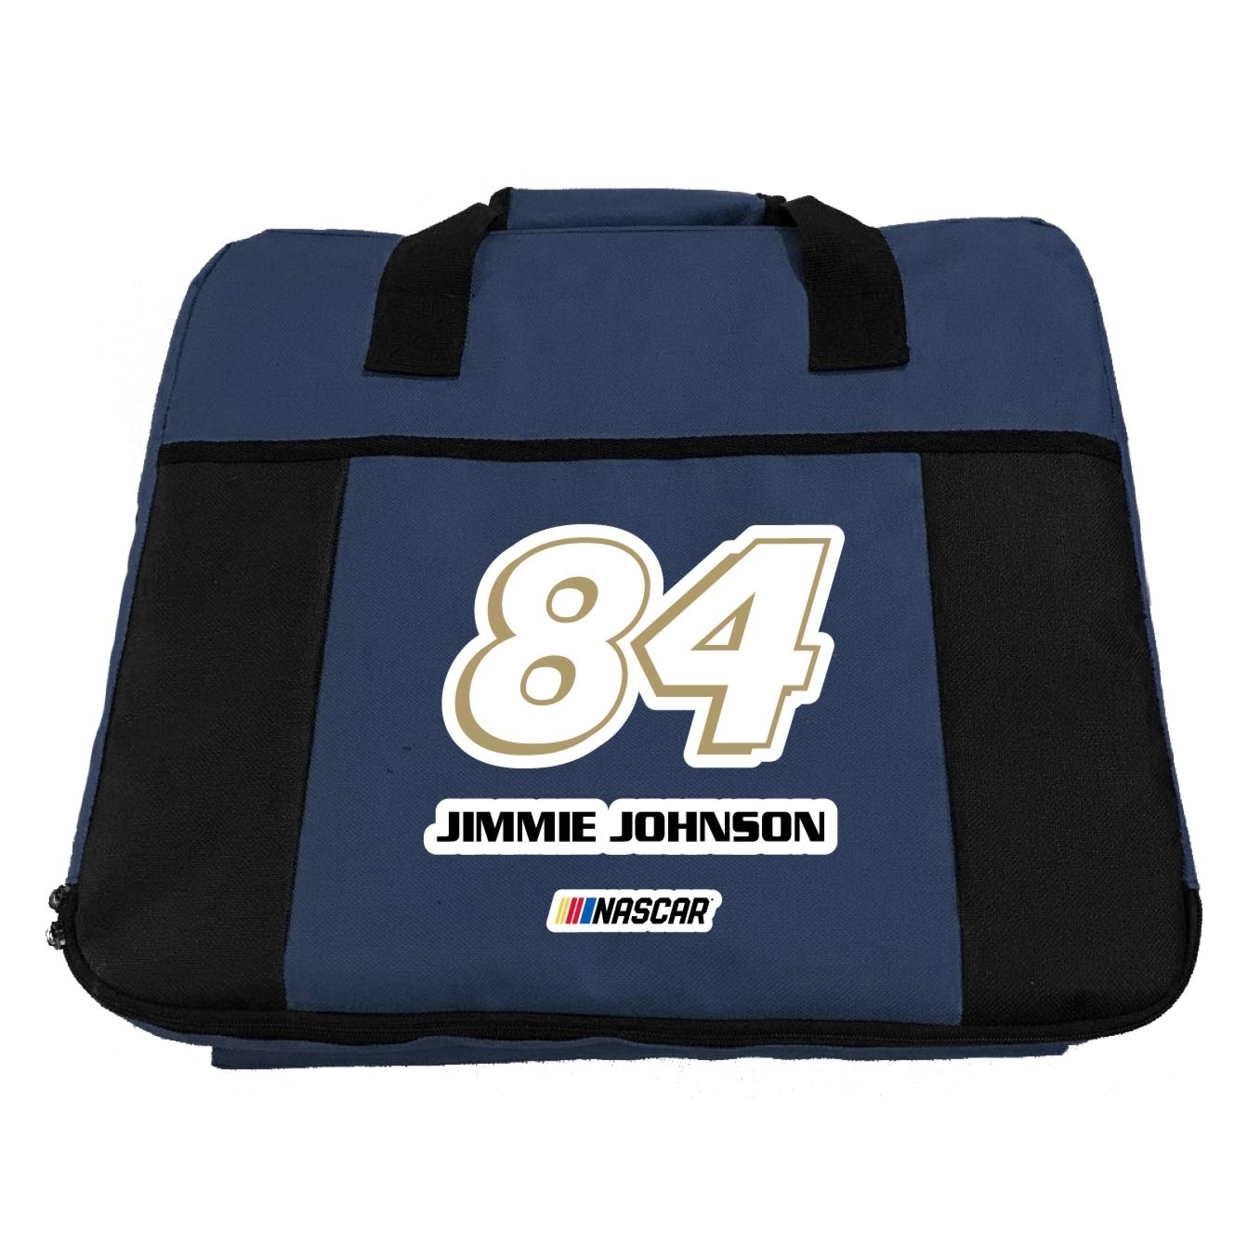 #84 Jimmie Johnson Officially Licensed Deluxe Seat Cushion